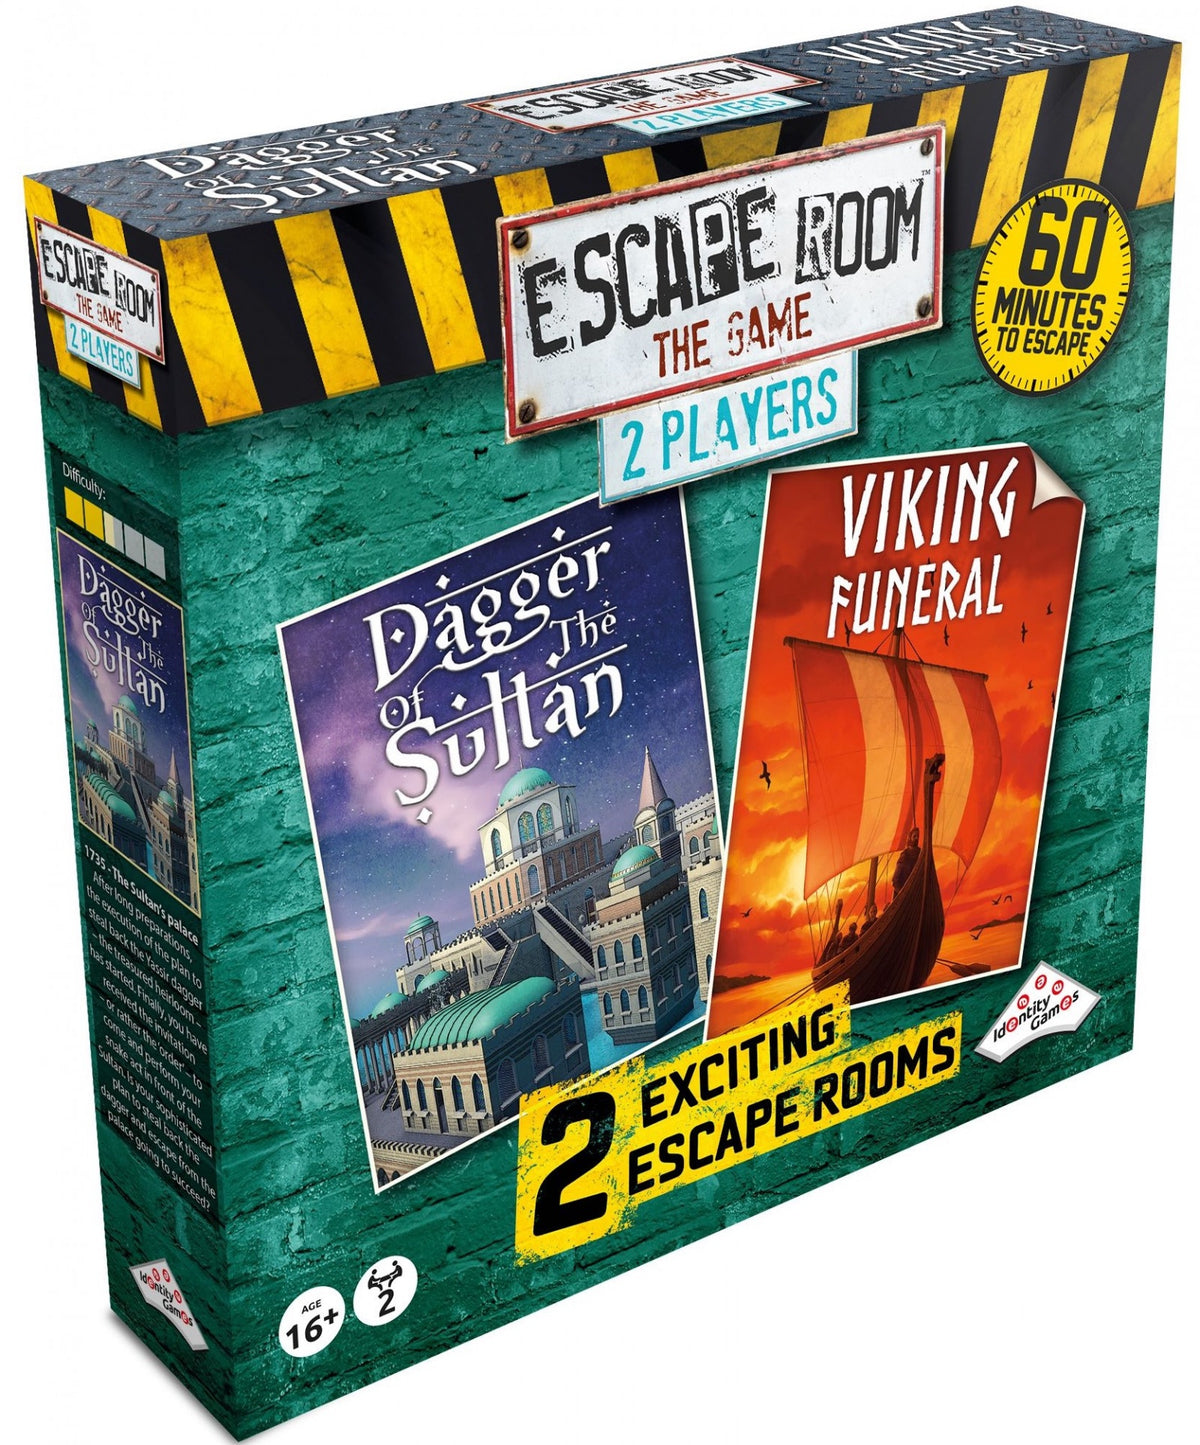 Escape Room The Game 2 Players Dagger Of The Sultan and Viking Funeral